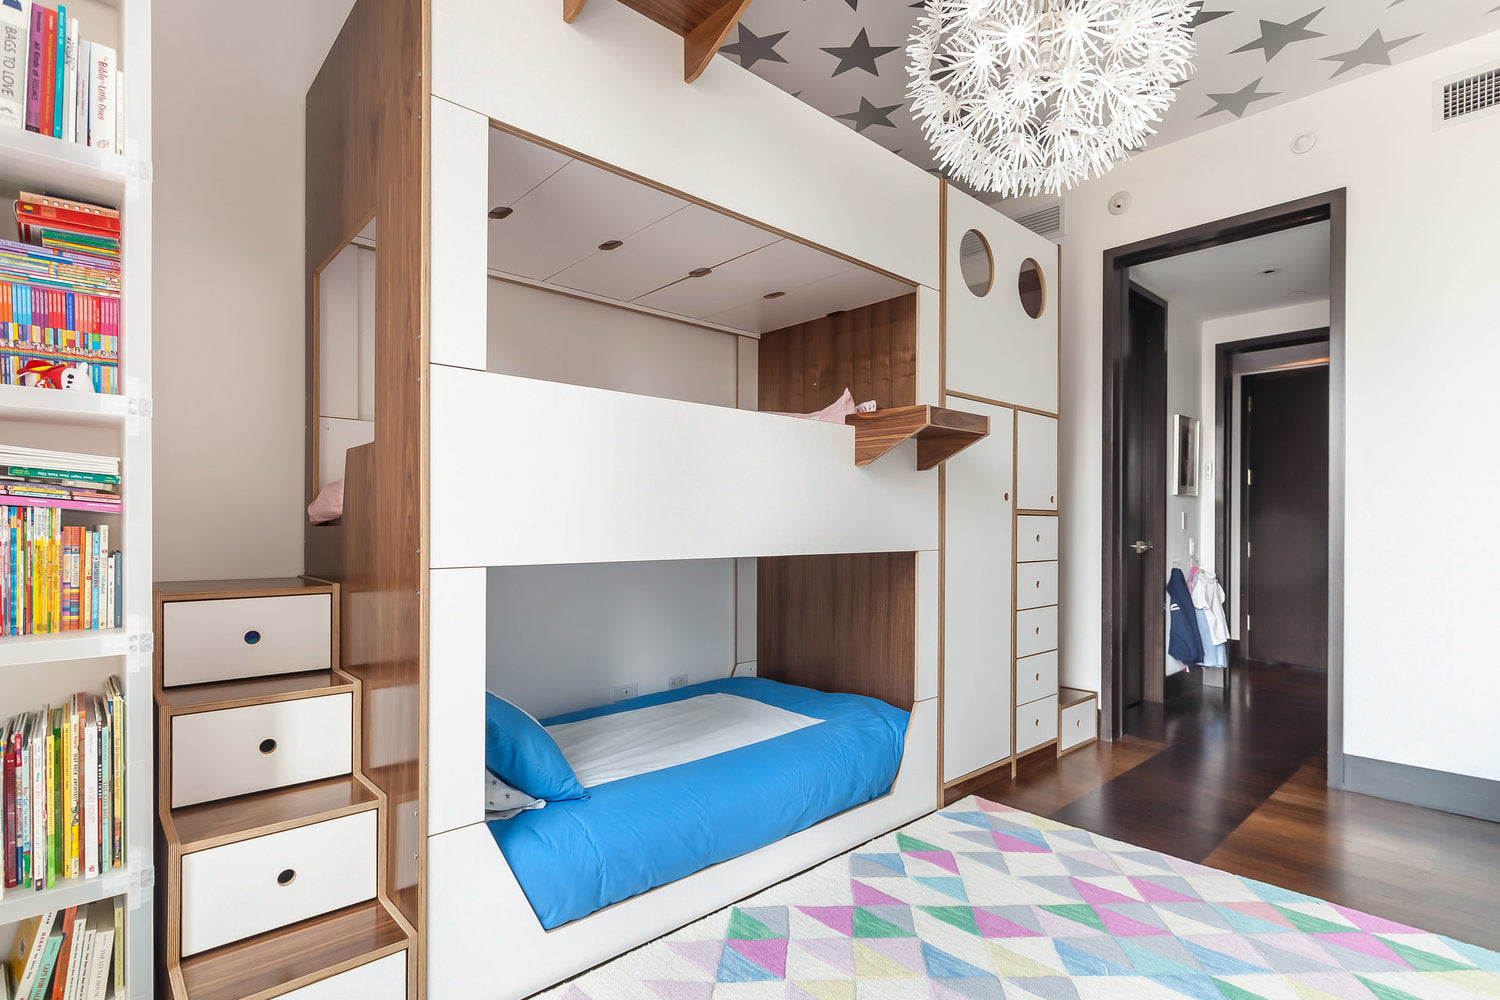 Modern children's bedroom with built-in bunk beds, colorful rug, and star-patterned ceiling.